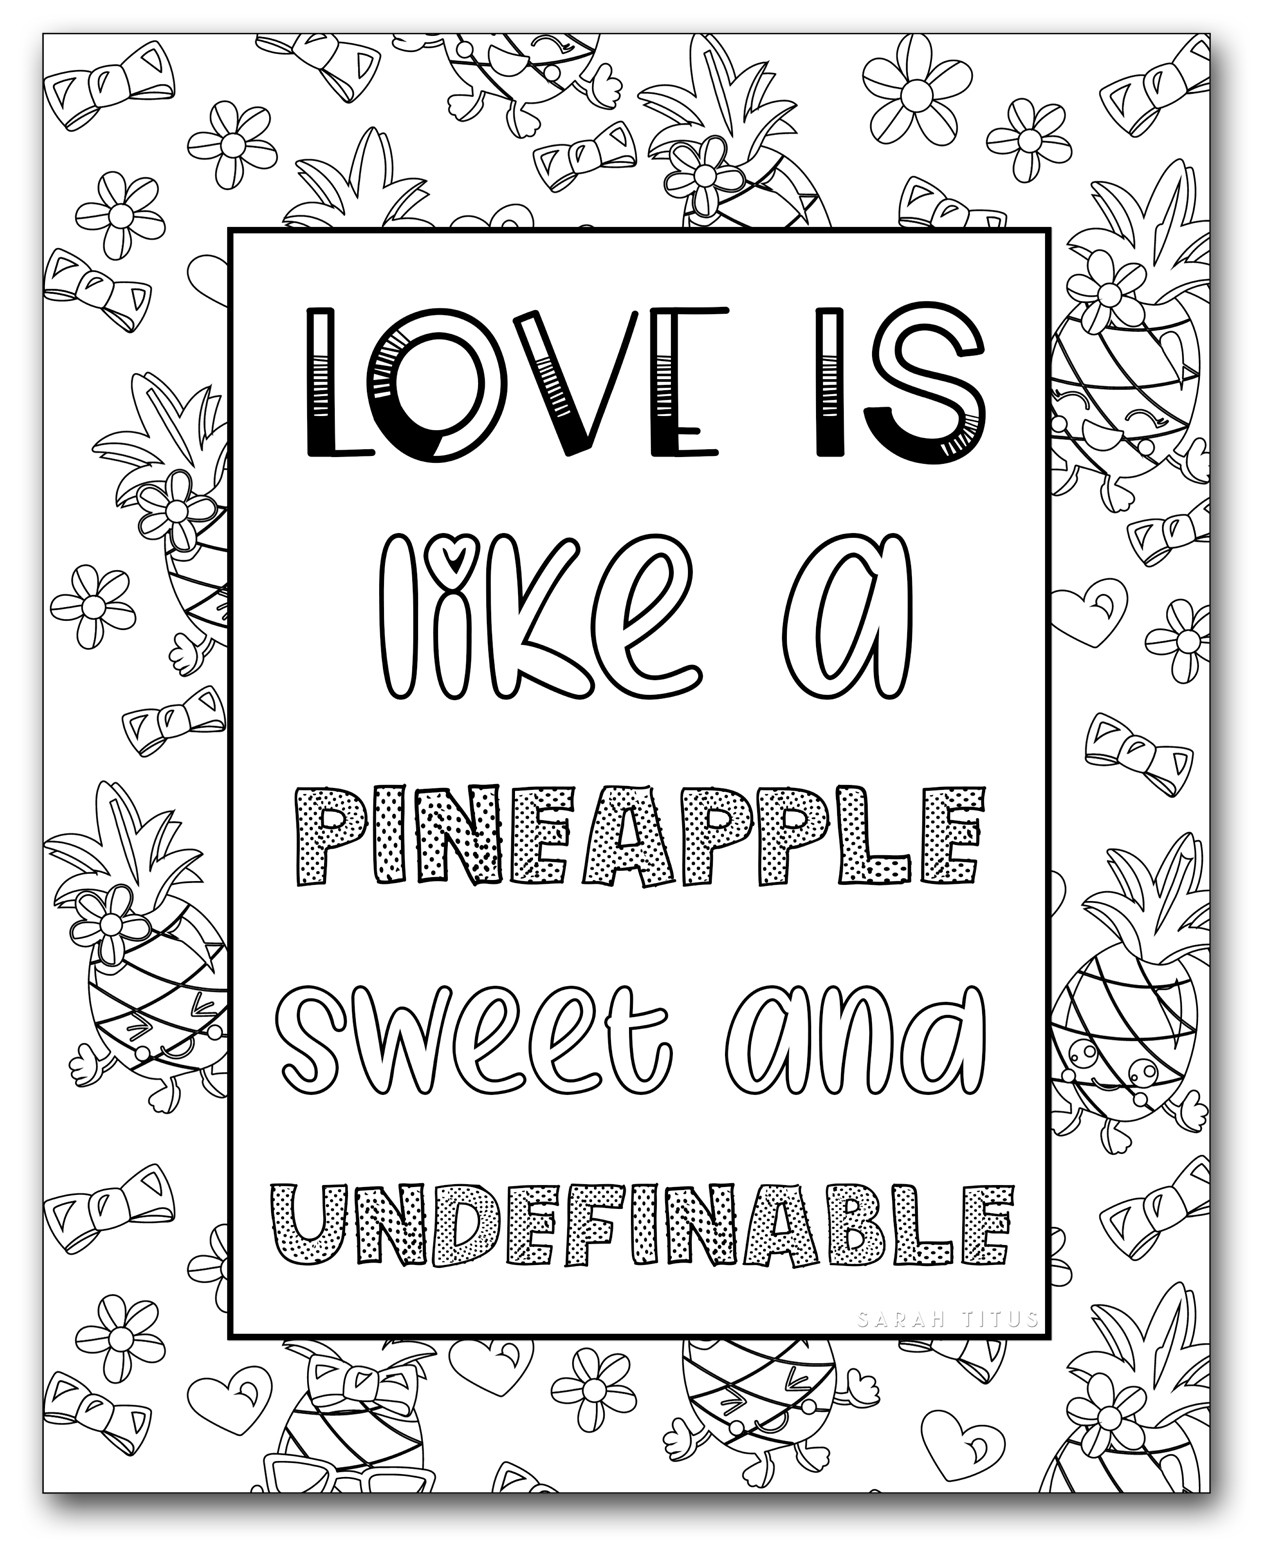 Free Printable Coloring Sheets For Girls
 Printable Coloring Pages for Girls Sarah Titus